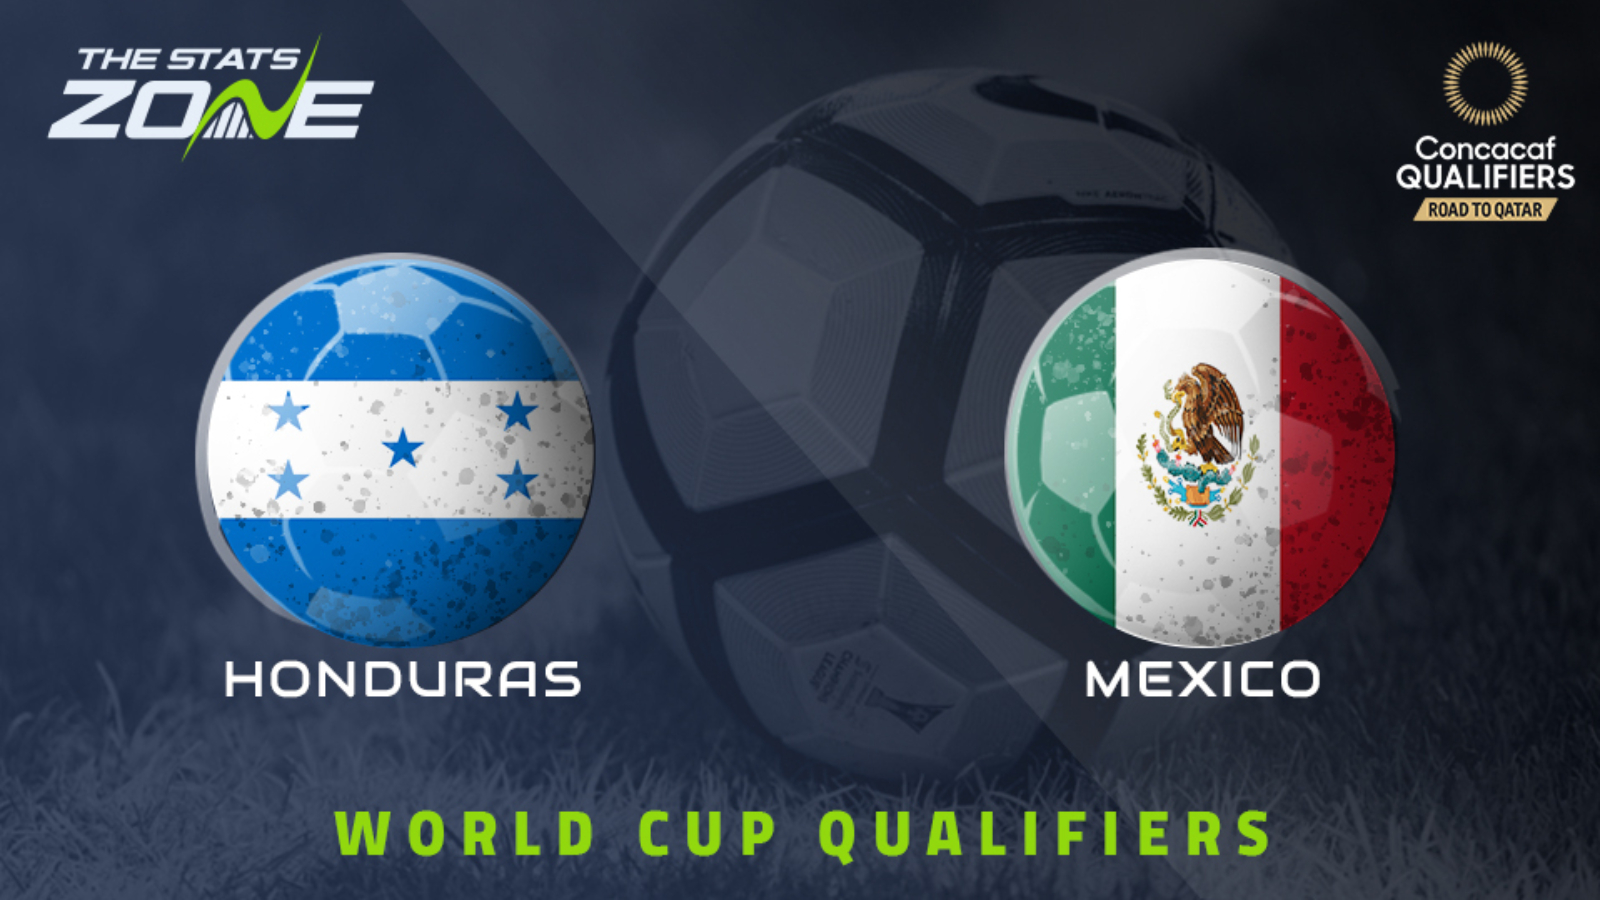 FIFA World Cup 2022 CONCACAF Qualifiers Honduras vs Mexico Preview